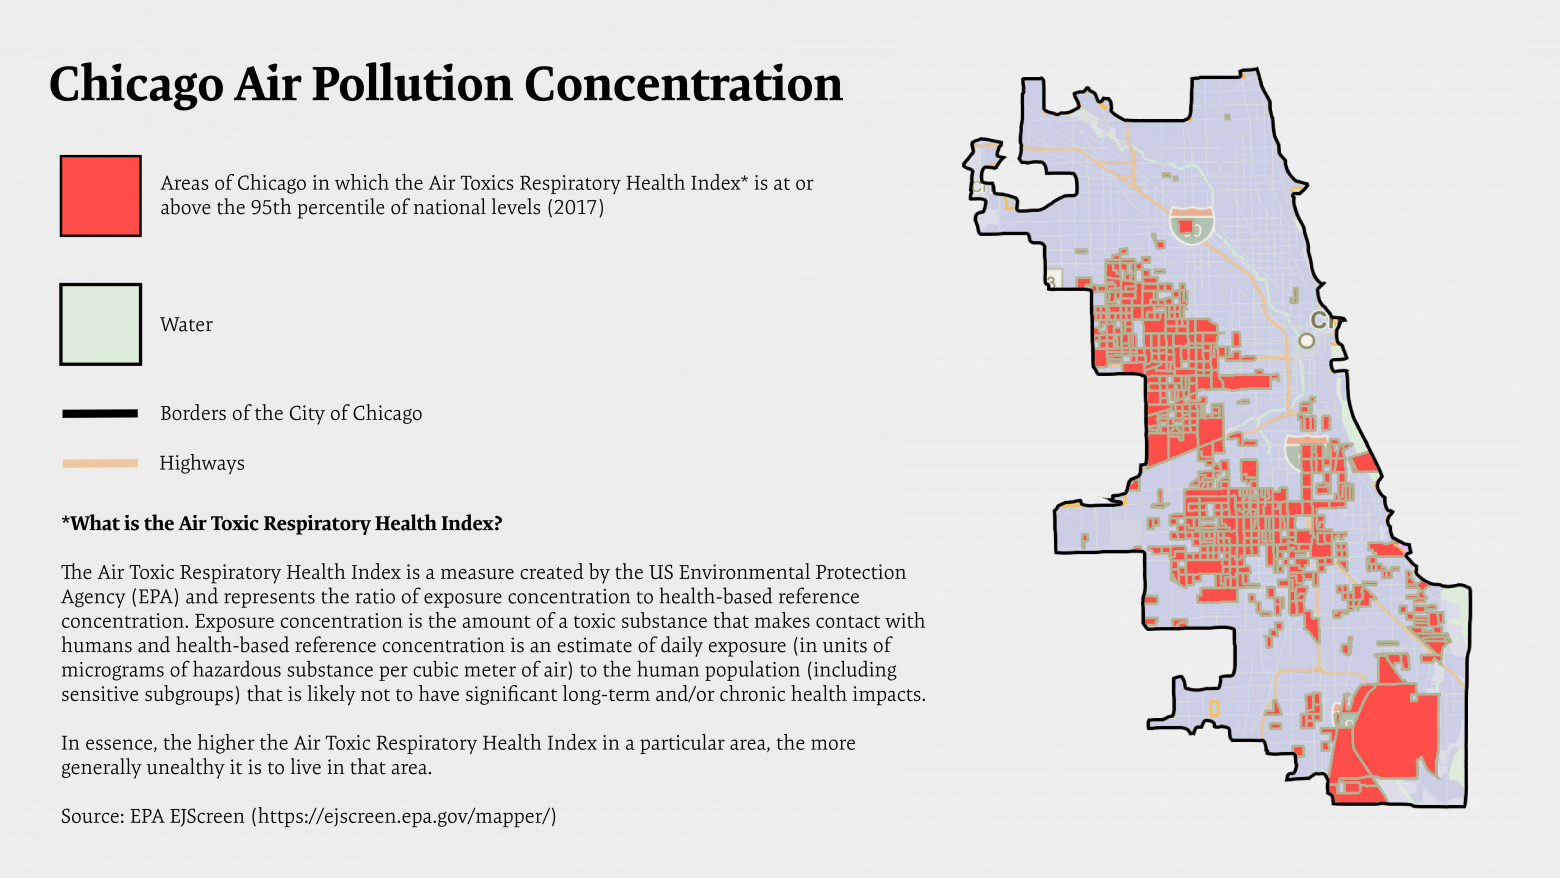 A graphic depicting air pollution concentration in Chicago. Areas with high scores on the Air Toxics Respiratory Health Index are denoted in orange on a map of Chicago.